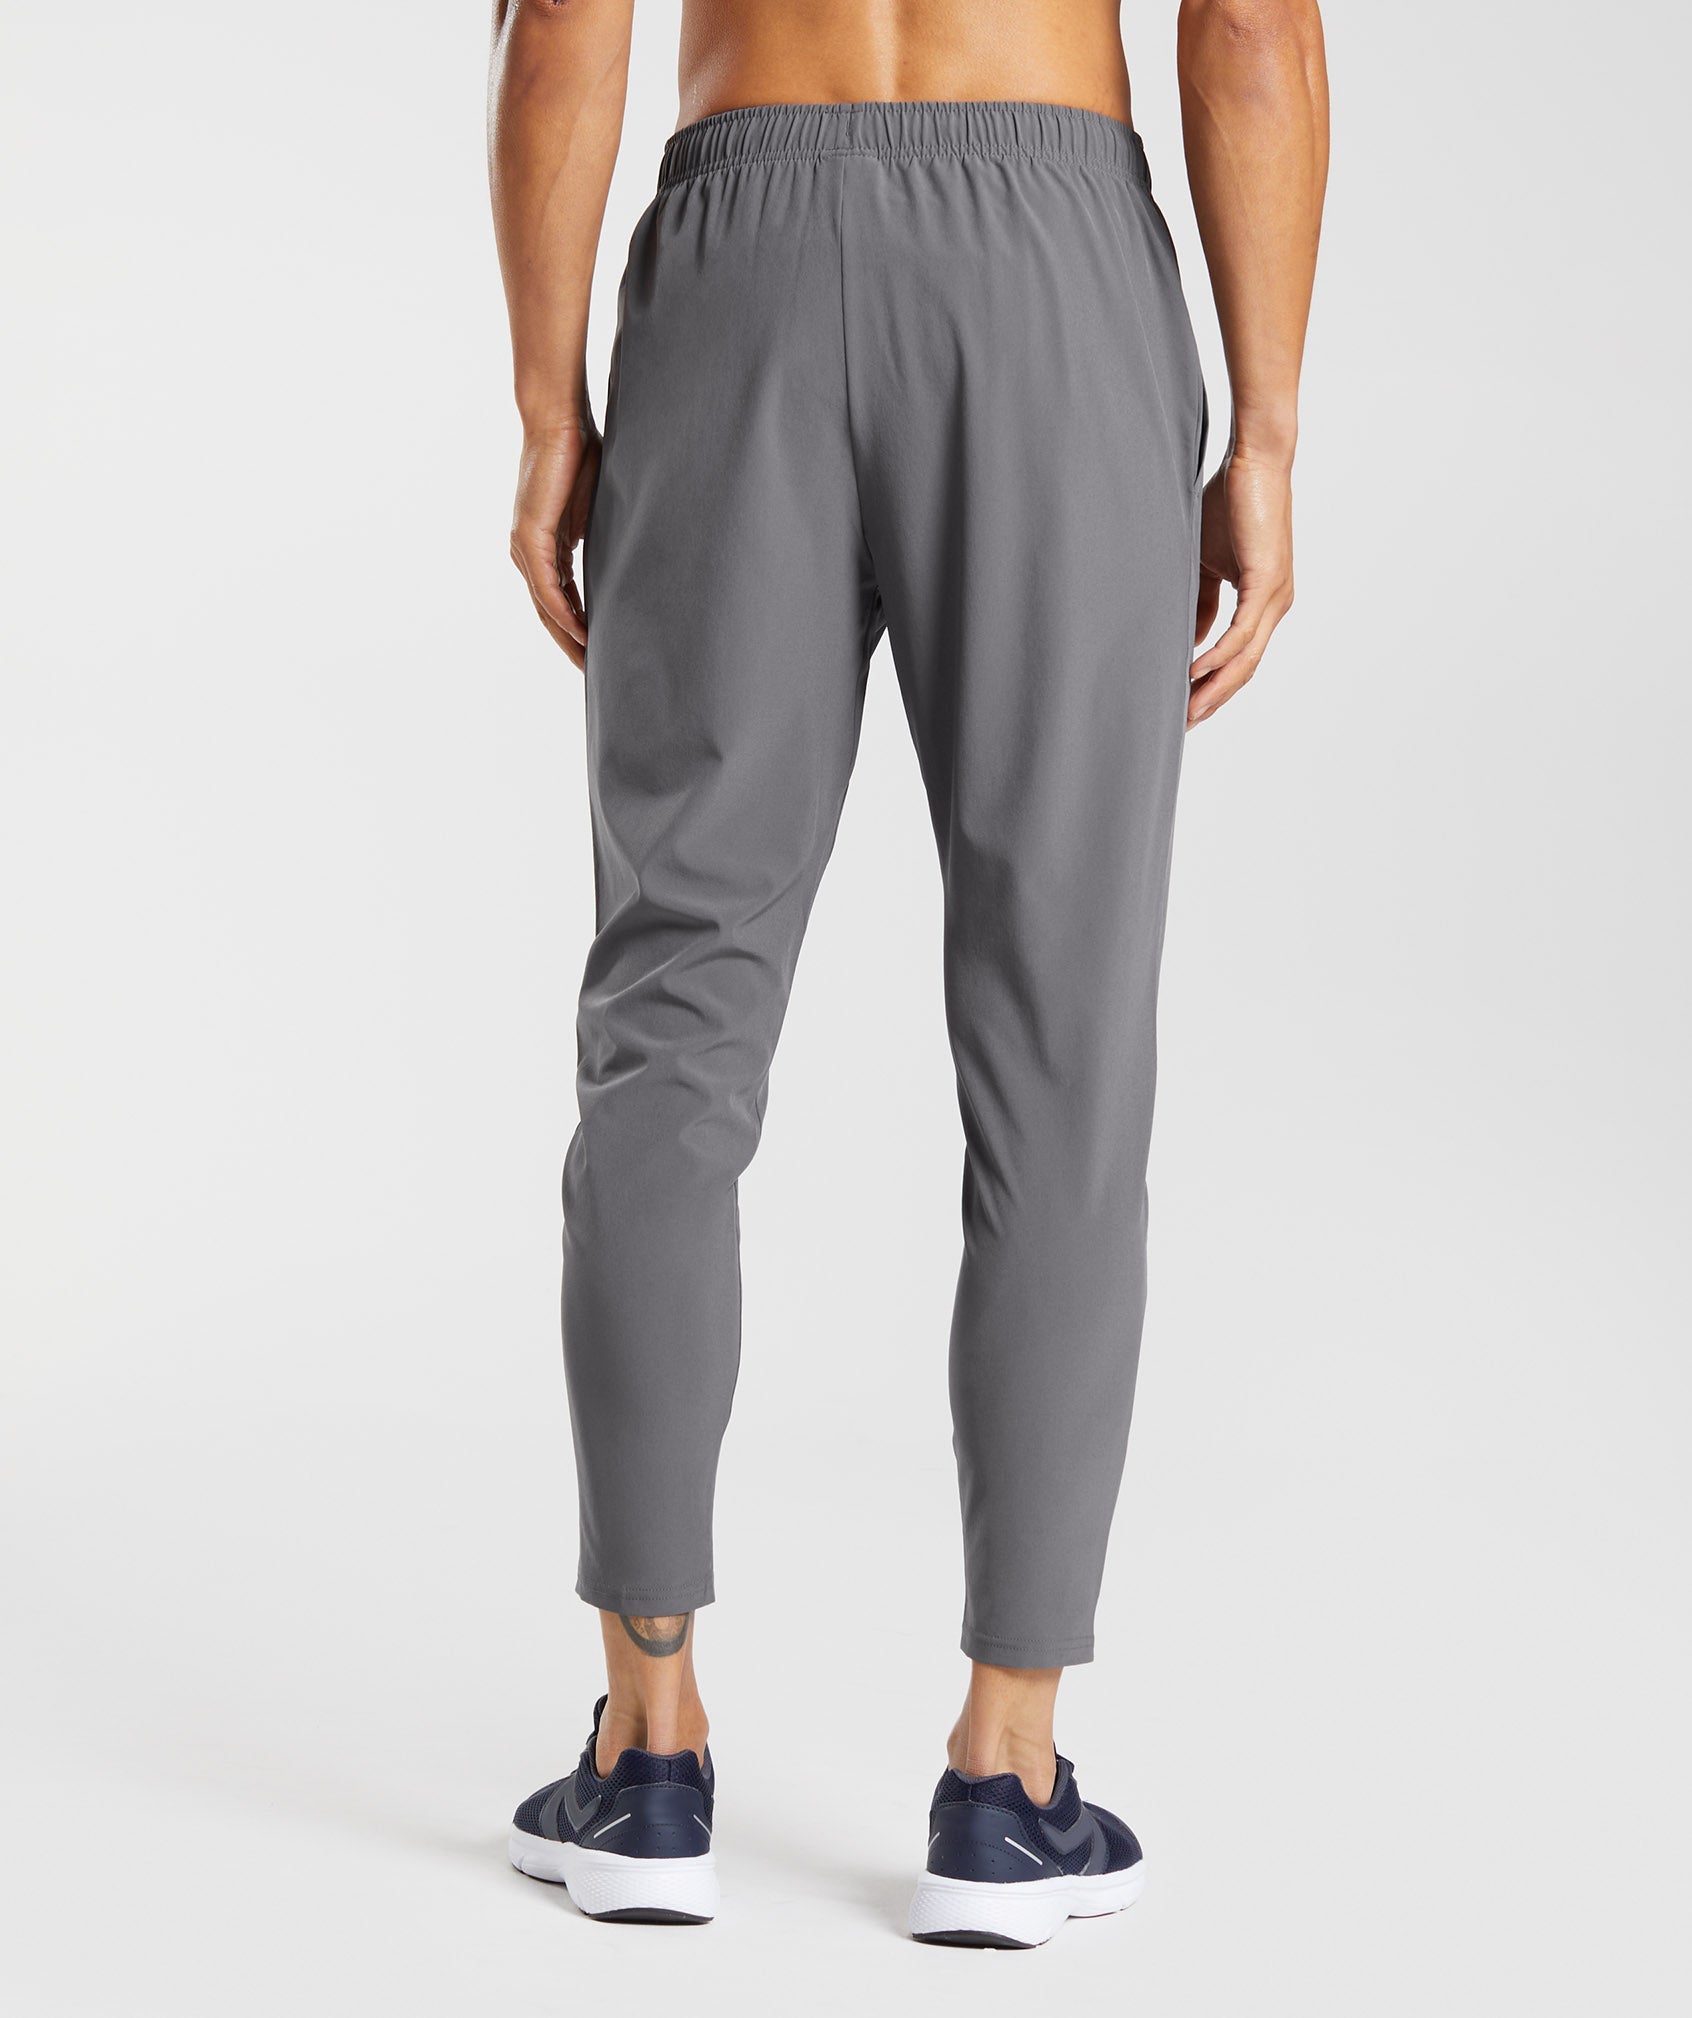 Gymshark Joggers Green Size XL - $29 (35% Off Retail) - From McKala